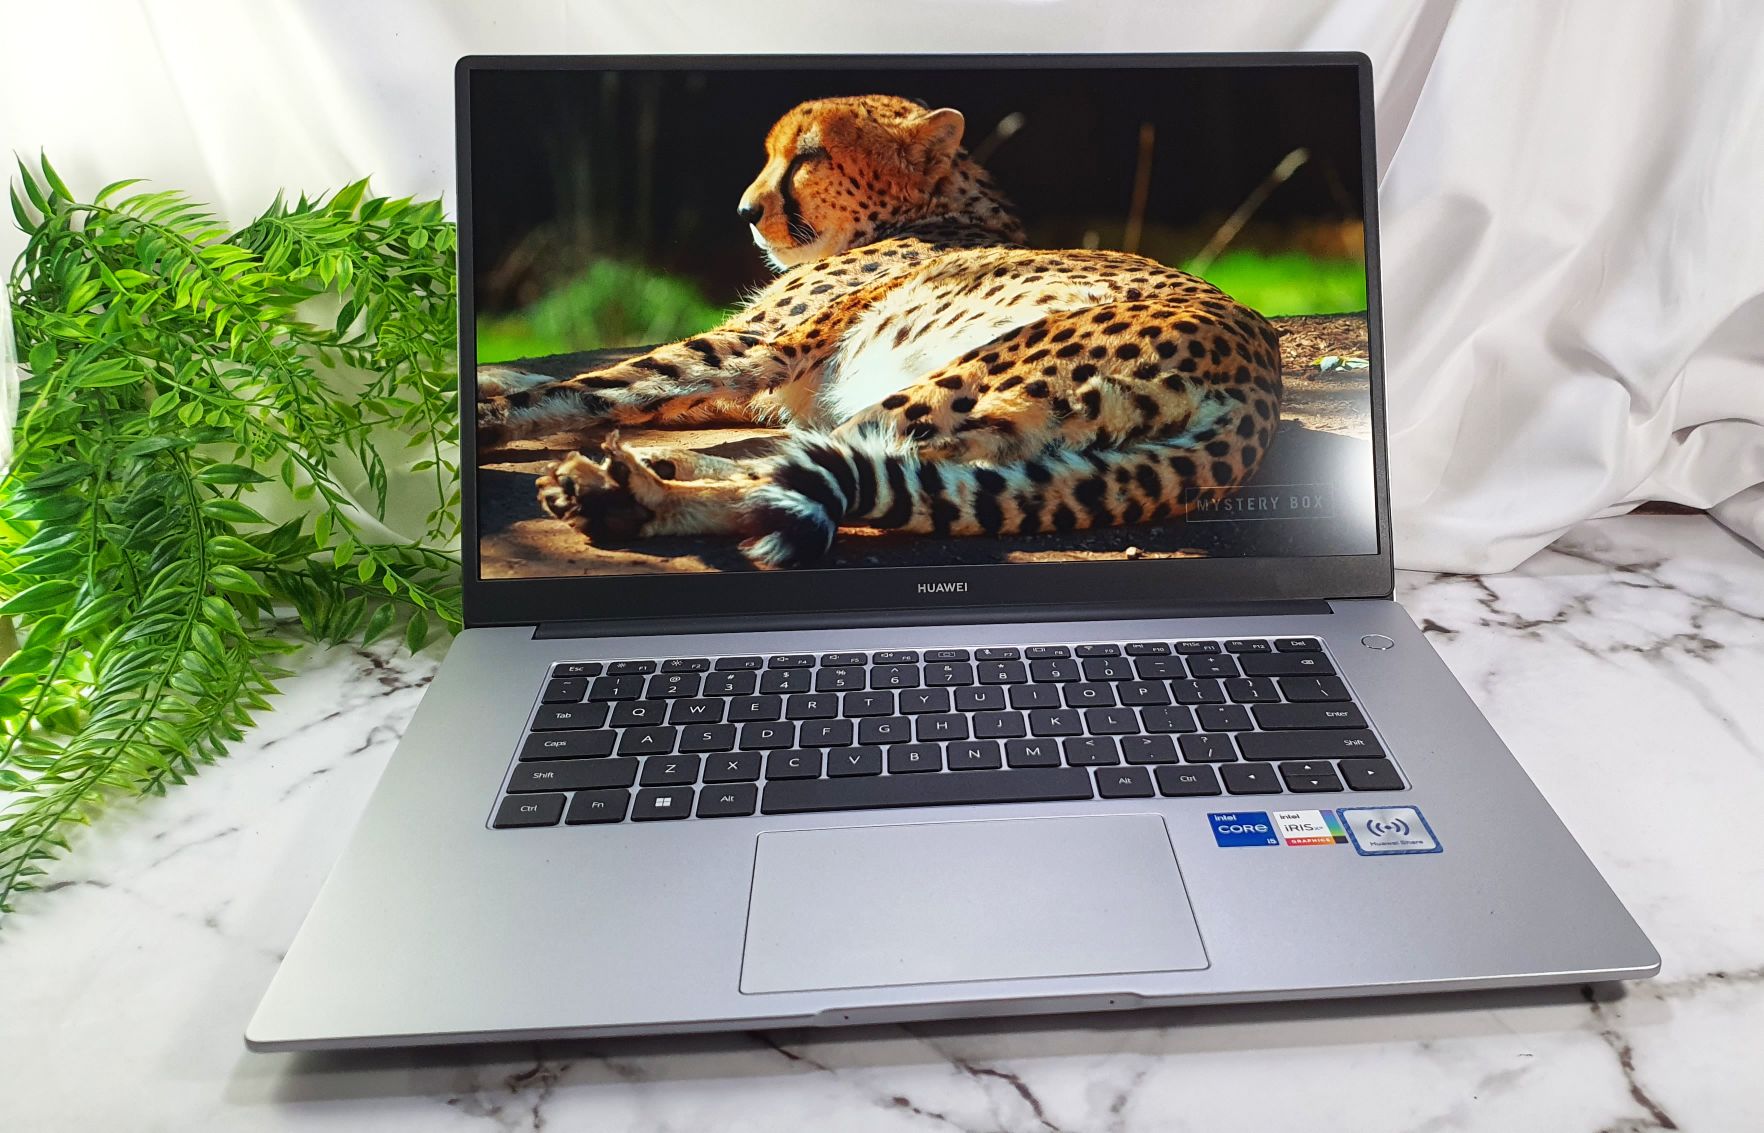 Huawei matebook i3 1115g4. Honor MAGICBOOK 16 Pro. Honor MAGICBOOK Pro 16.1. Acer a6.